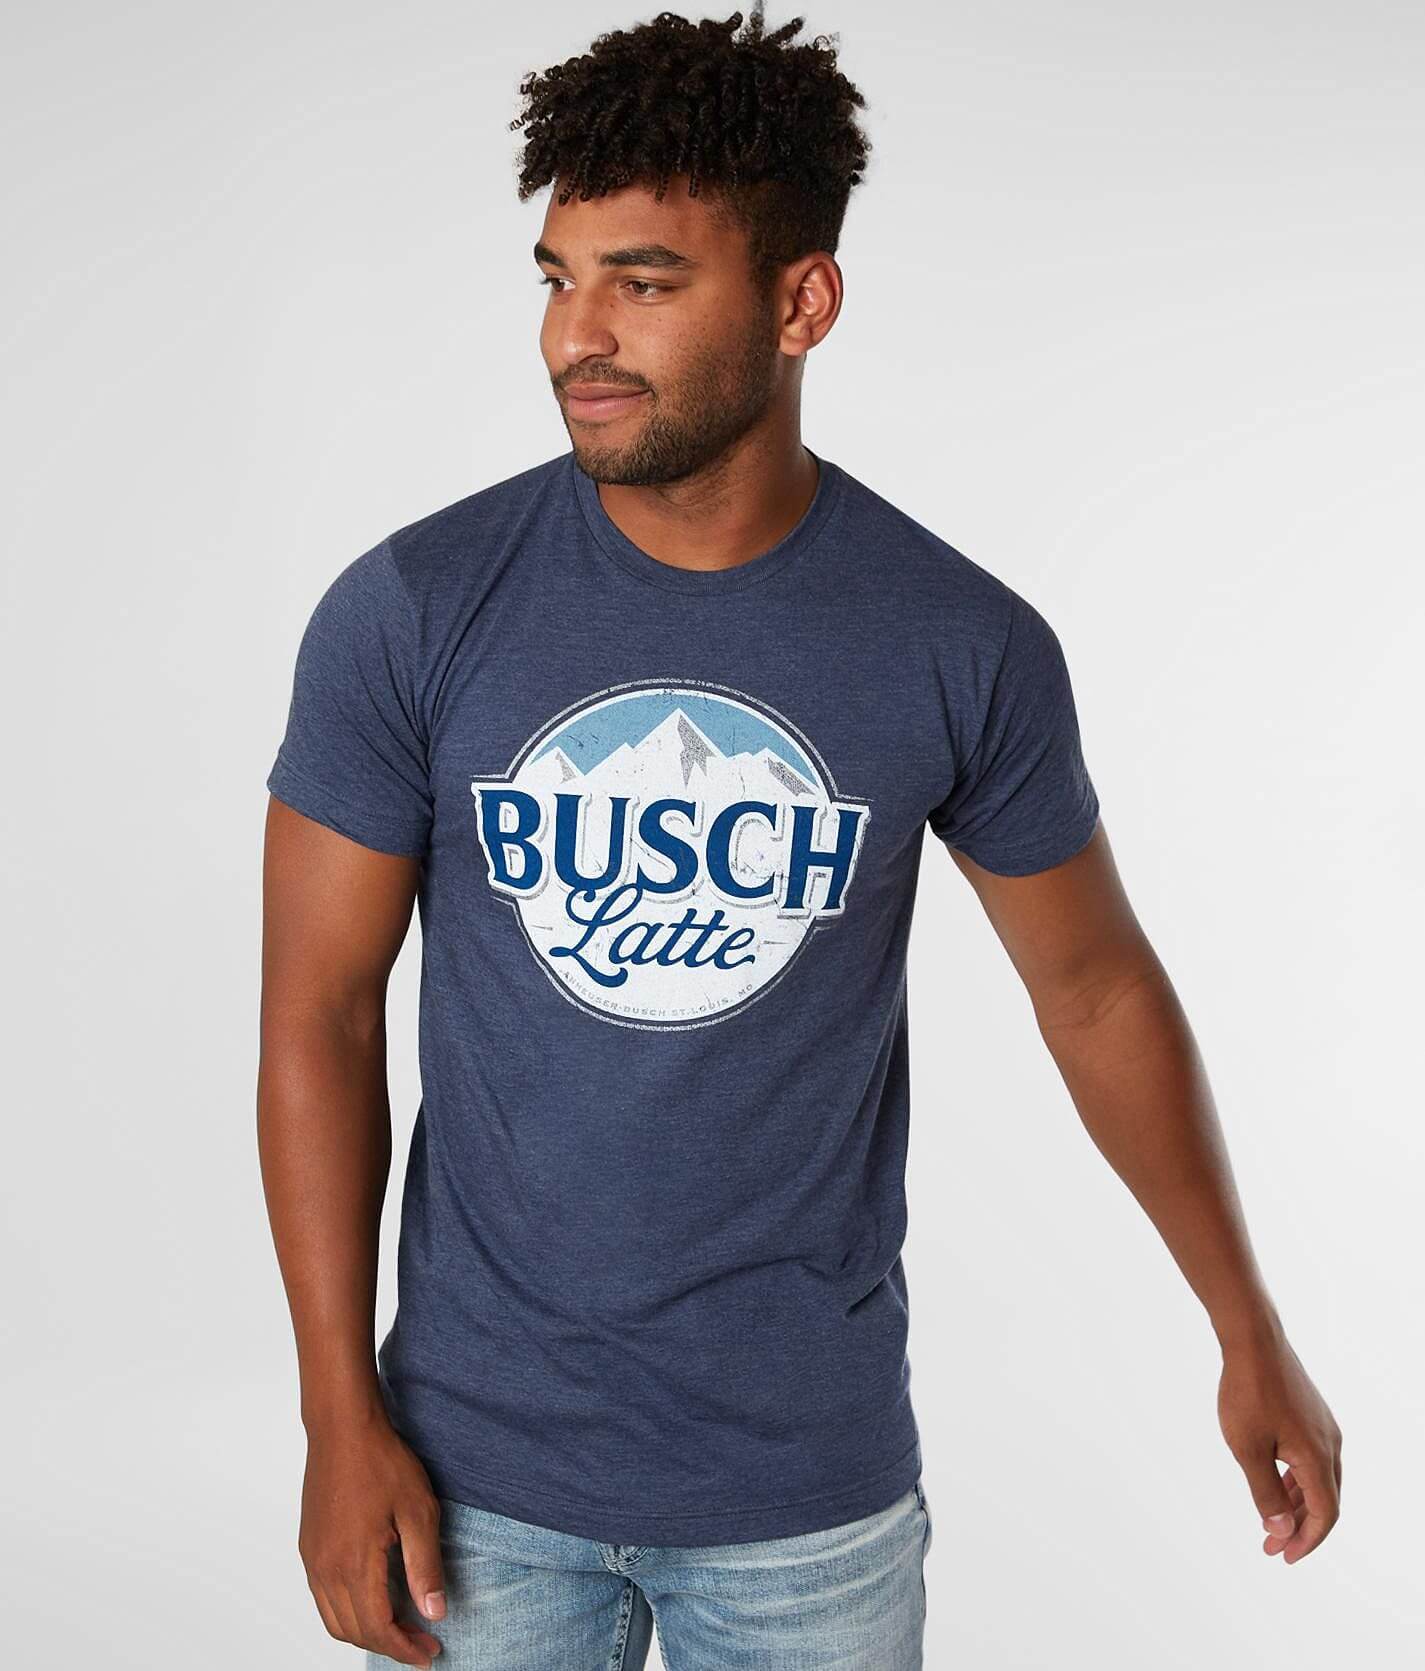 Busch latte where to buy 2020